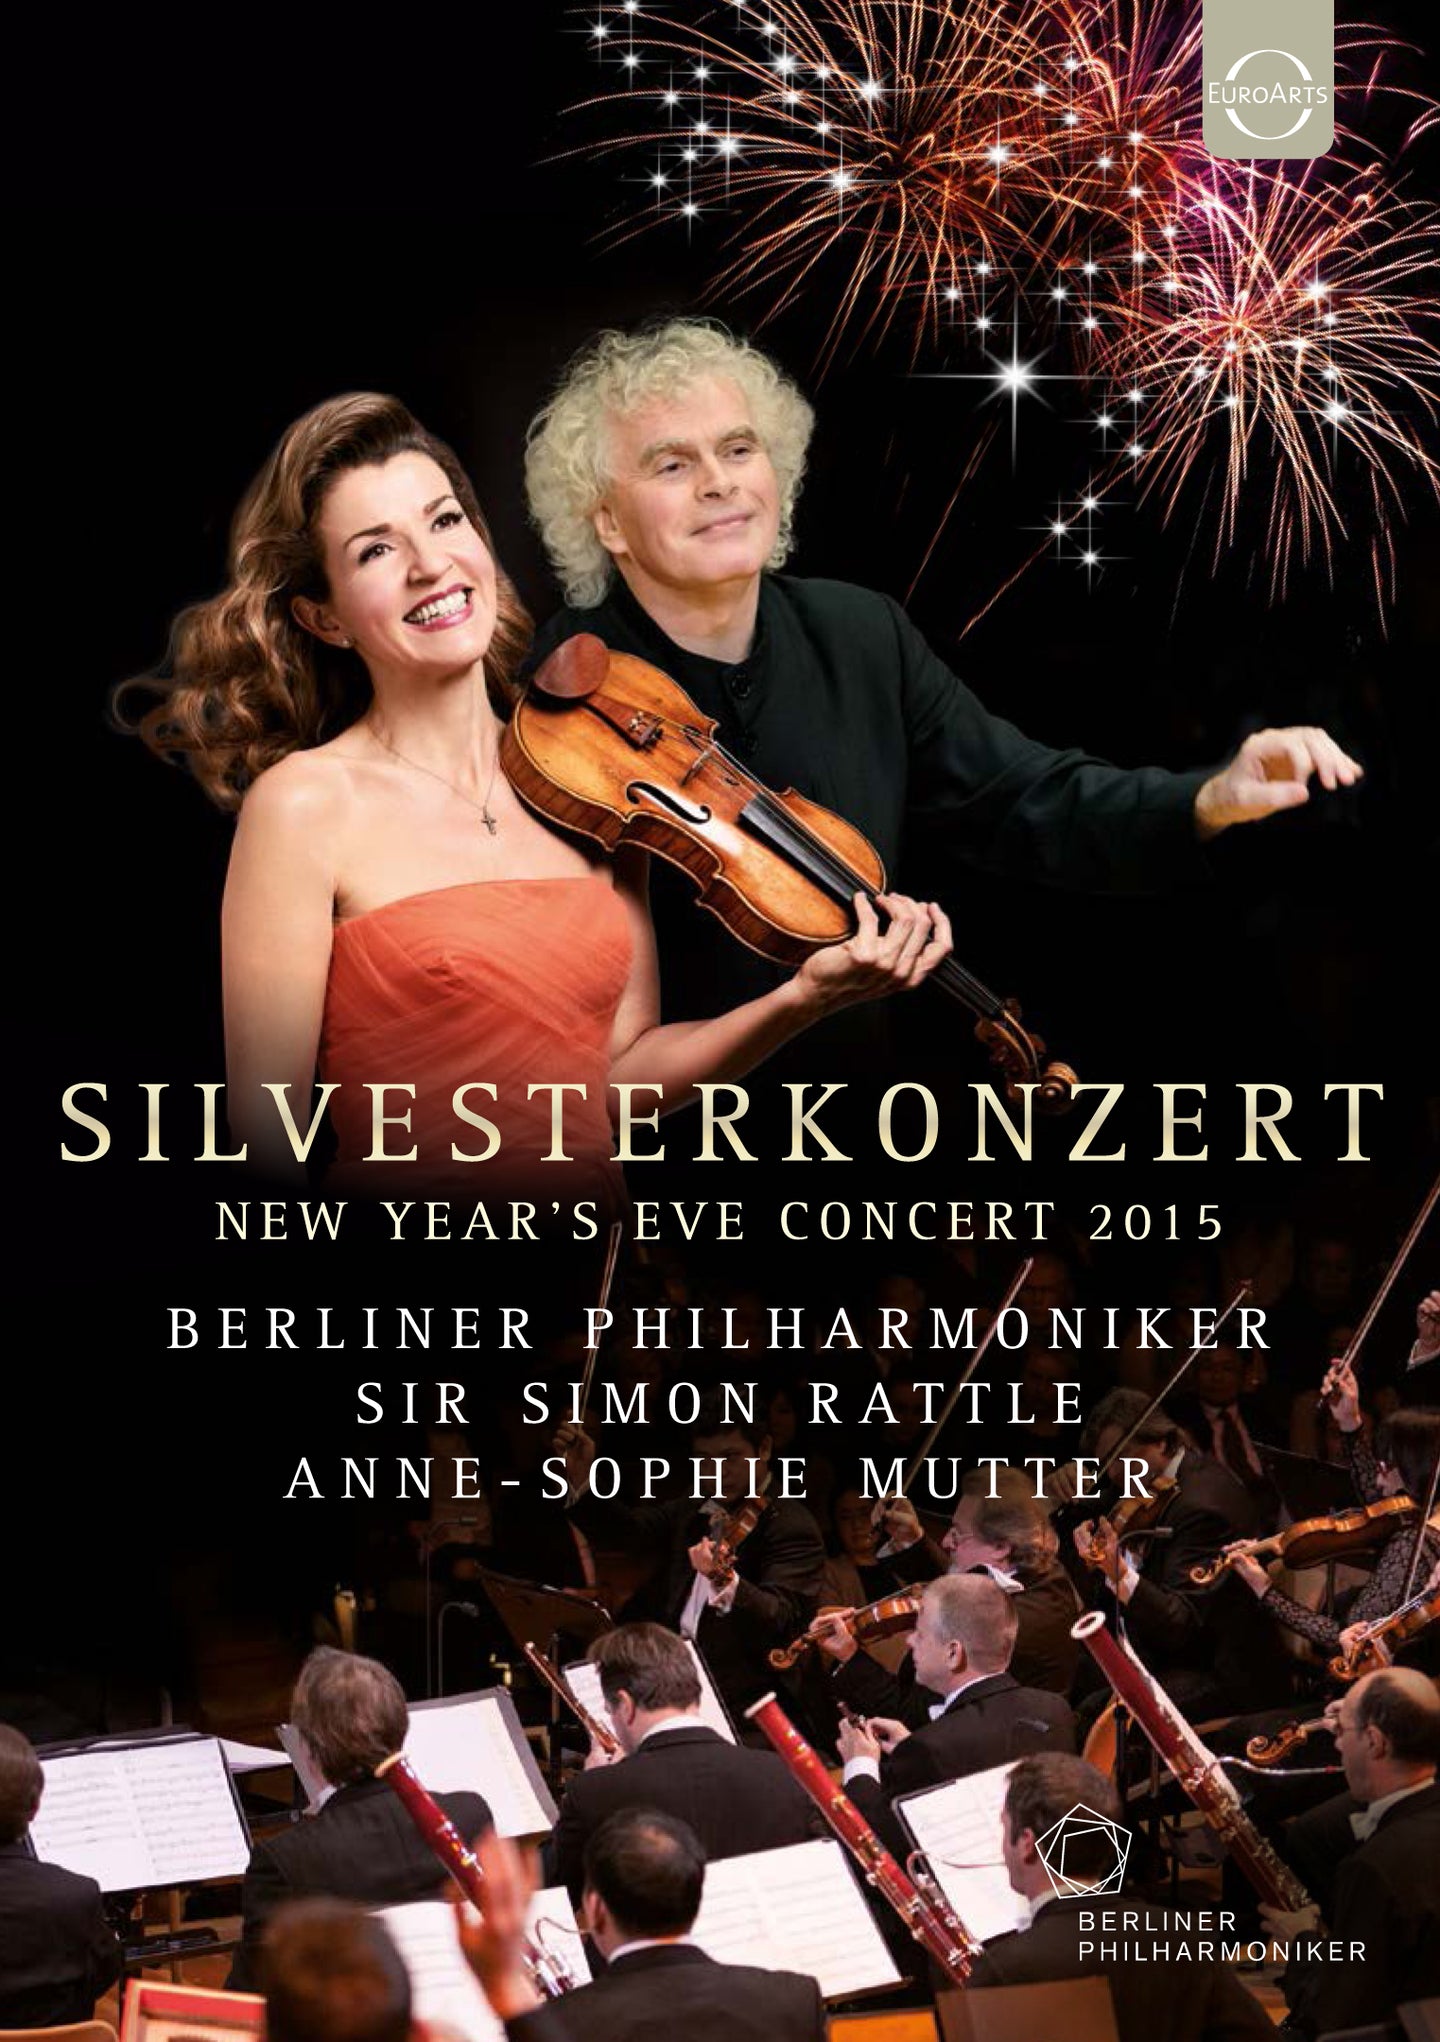 New Year's Eve Concert 2015